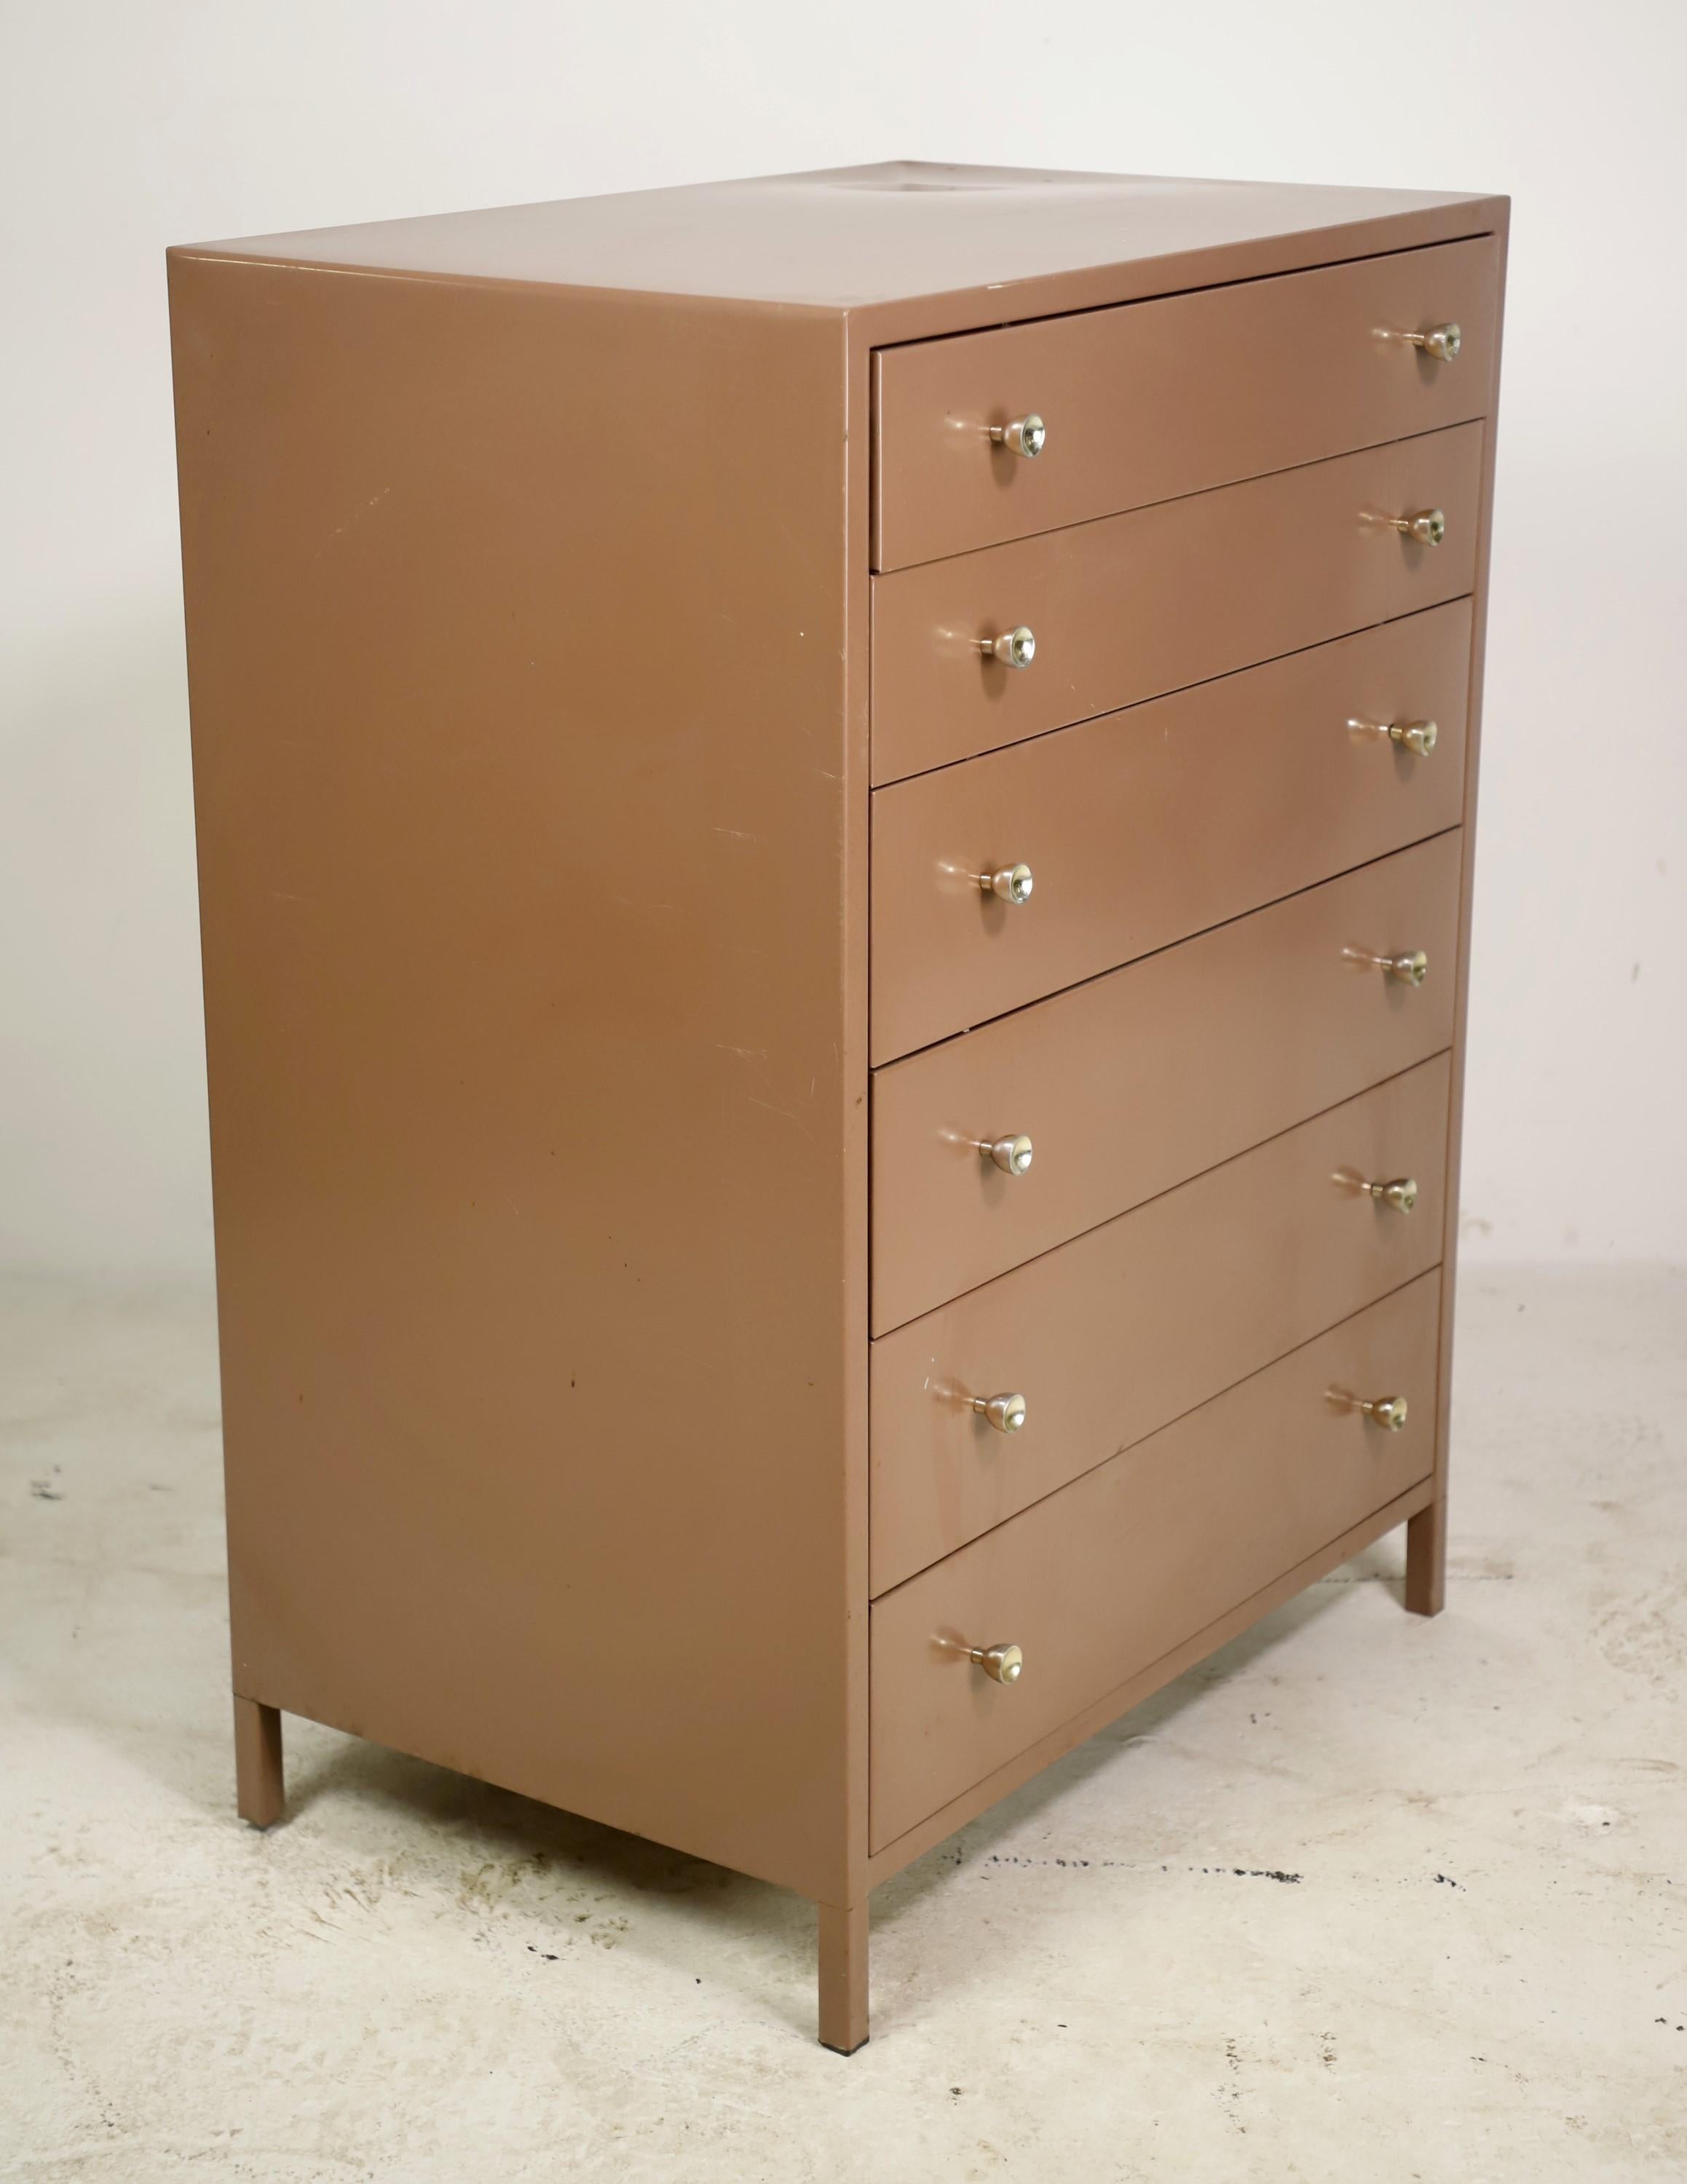 Beige painted vintage dresser made of steel with six drawers and nickel drawer pulls. This is in great condition. Please note, this item is located in our Scranton, PA location.